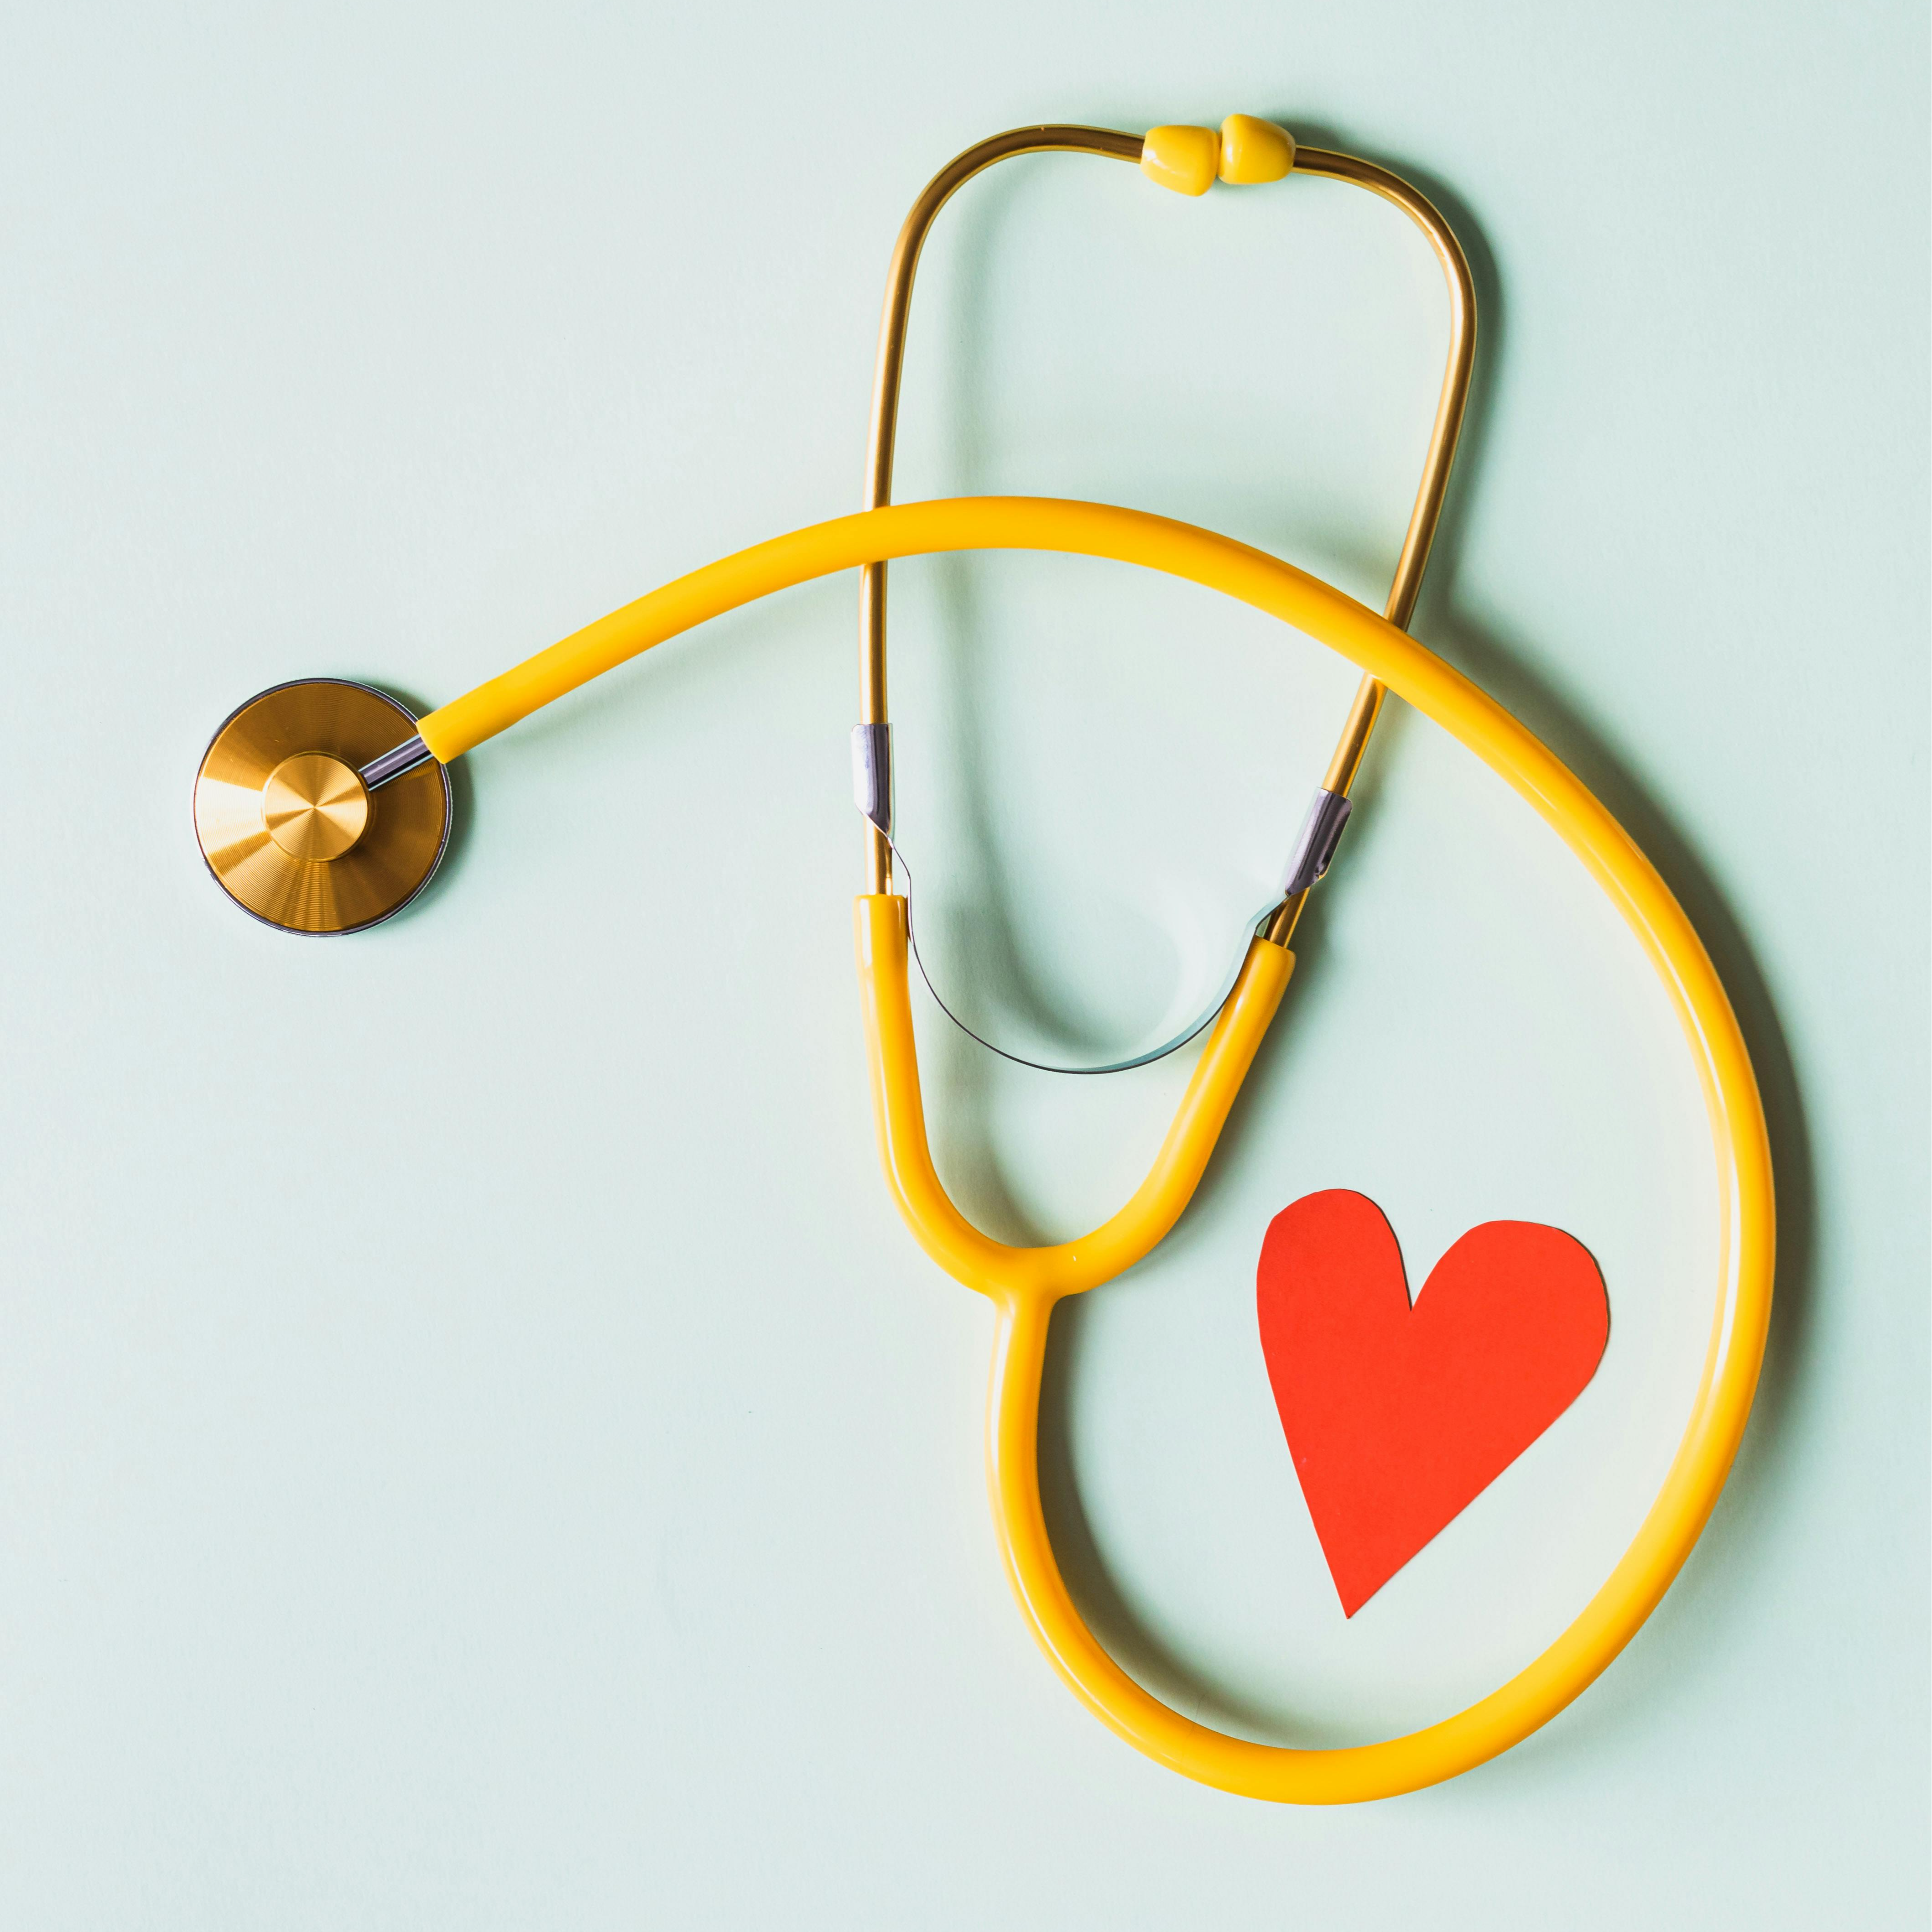 stethoscope and a heart 